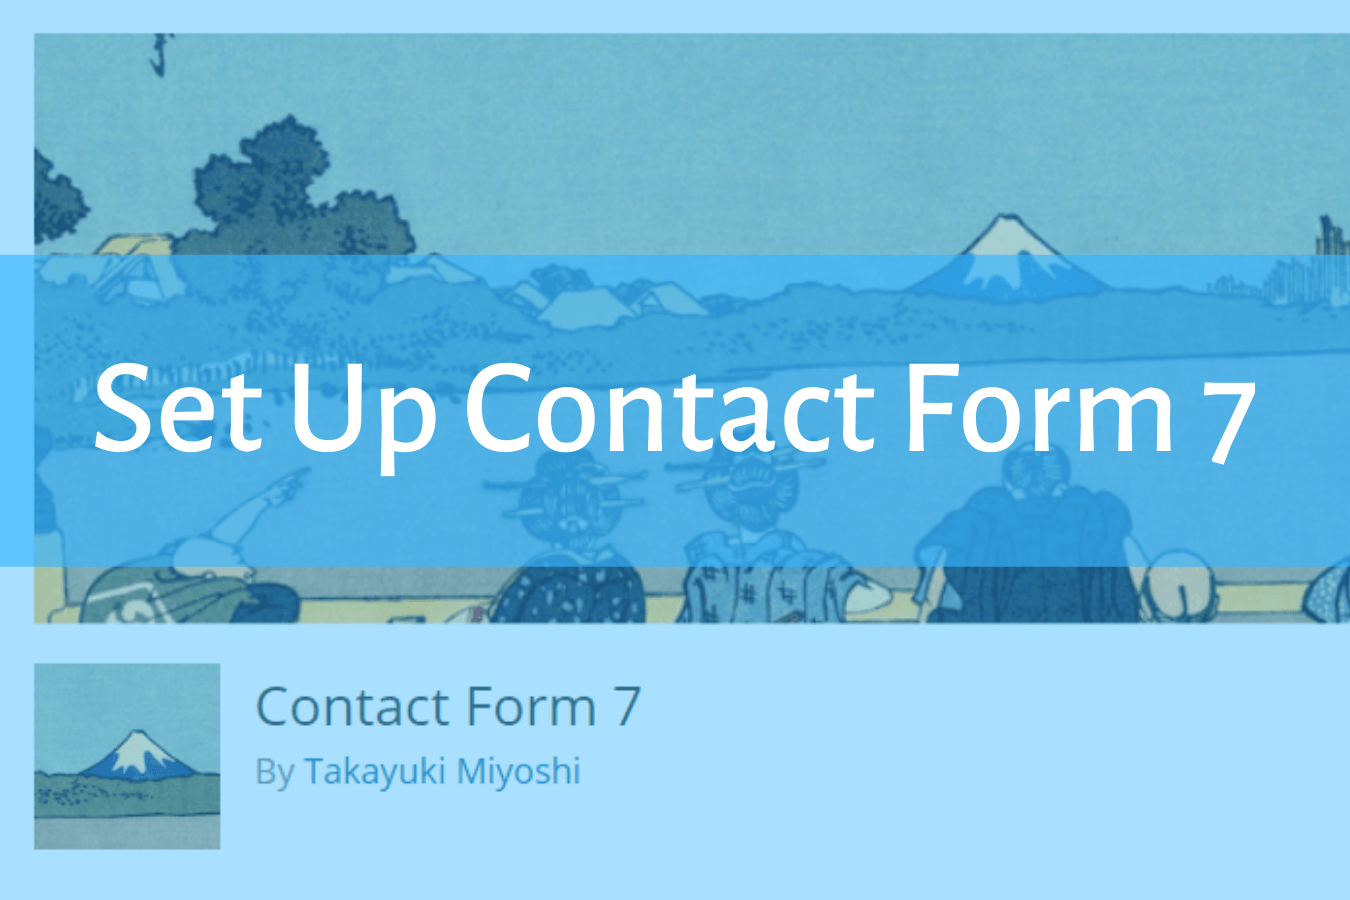 How to set up contact form 7